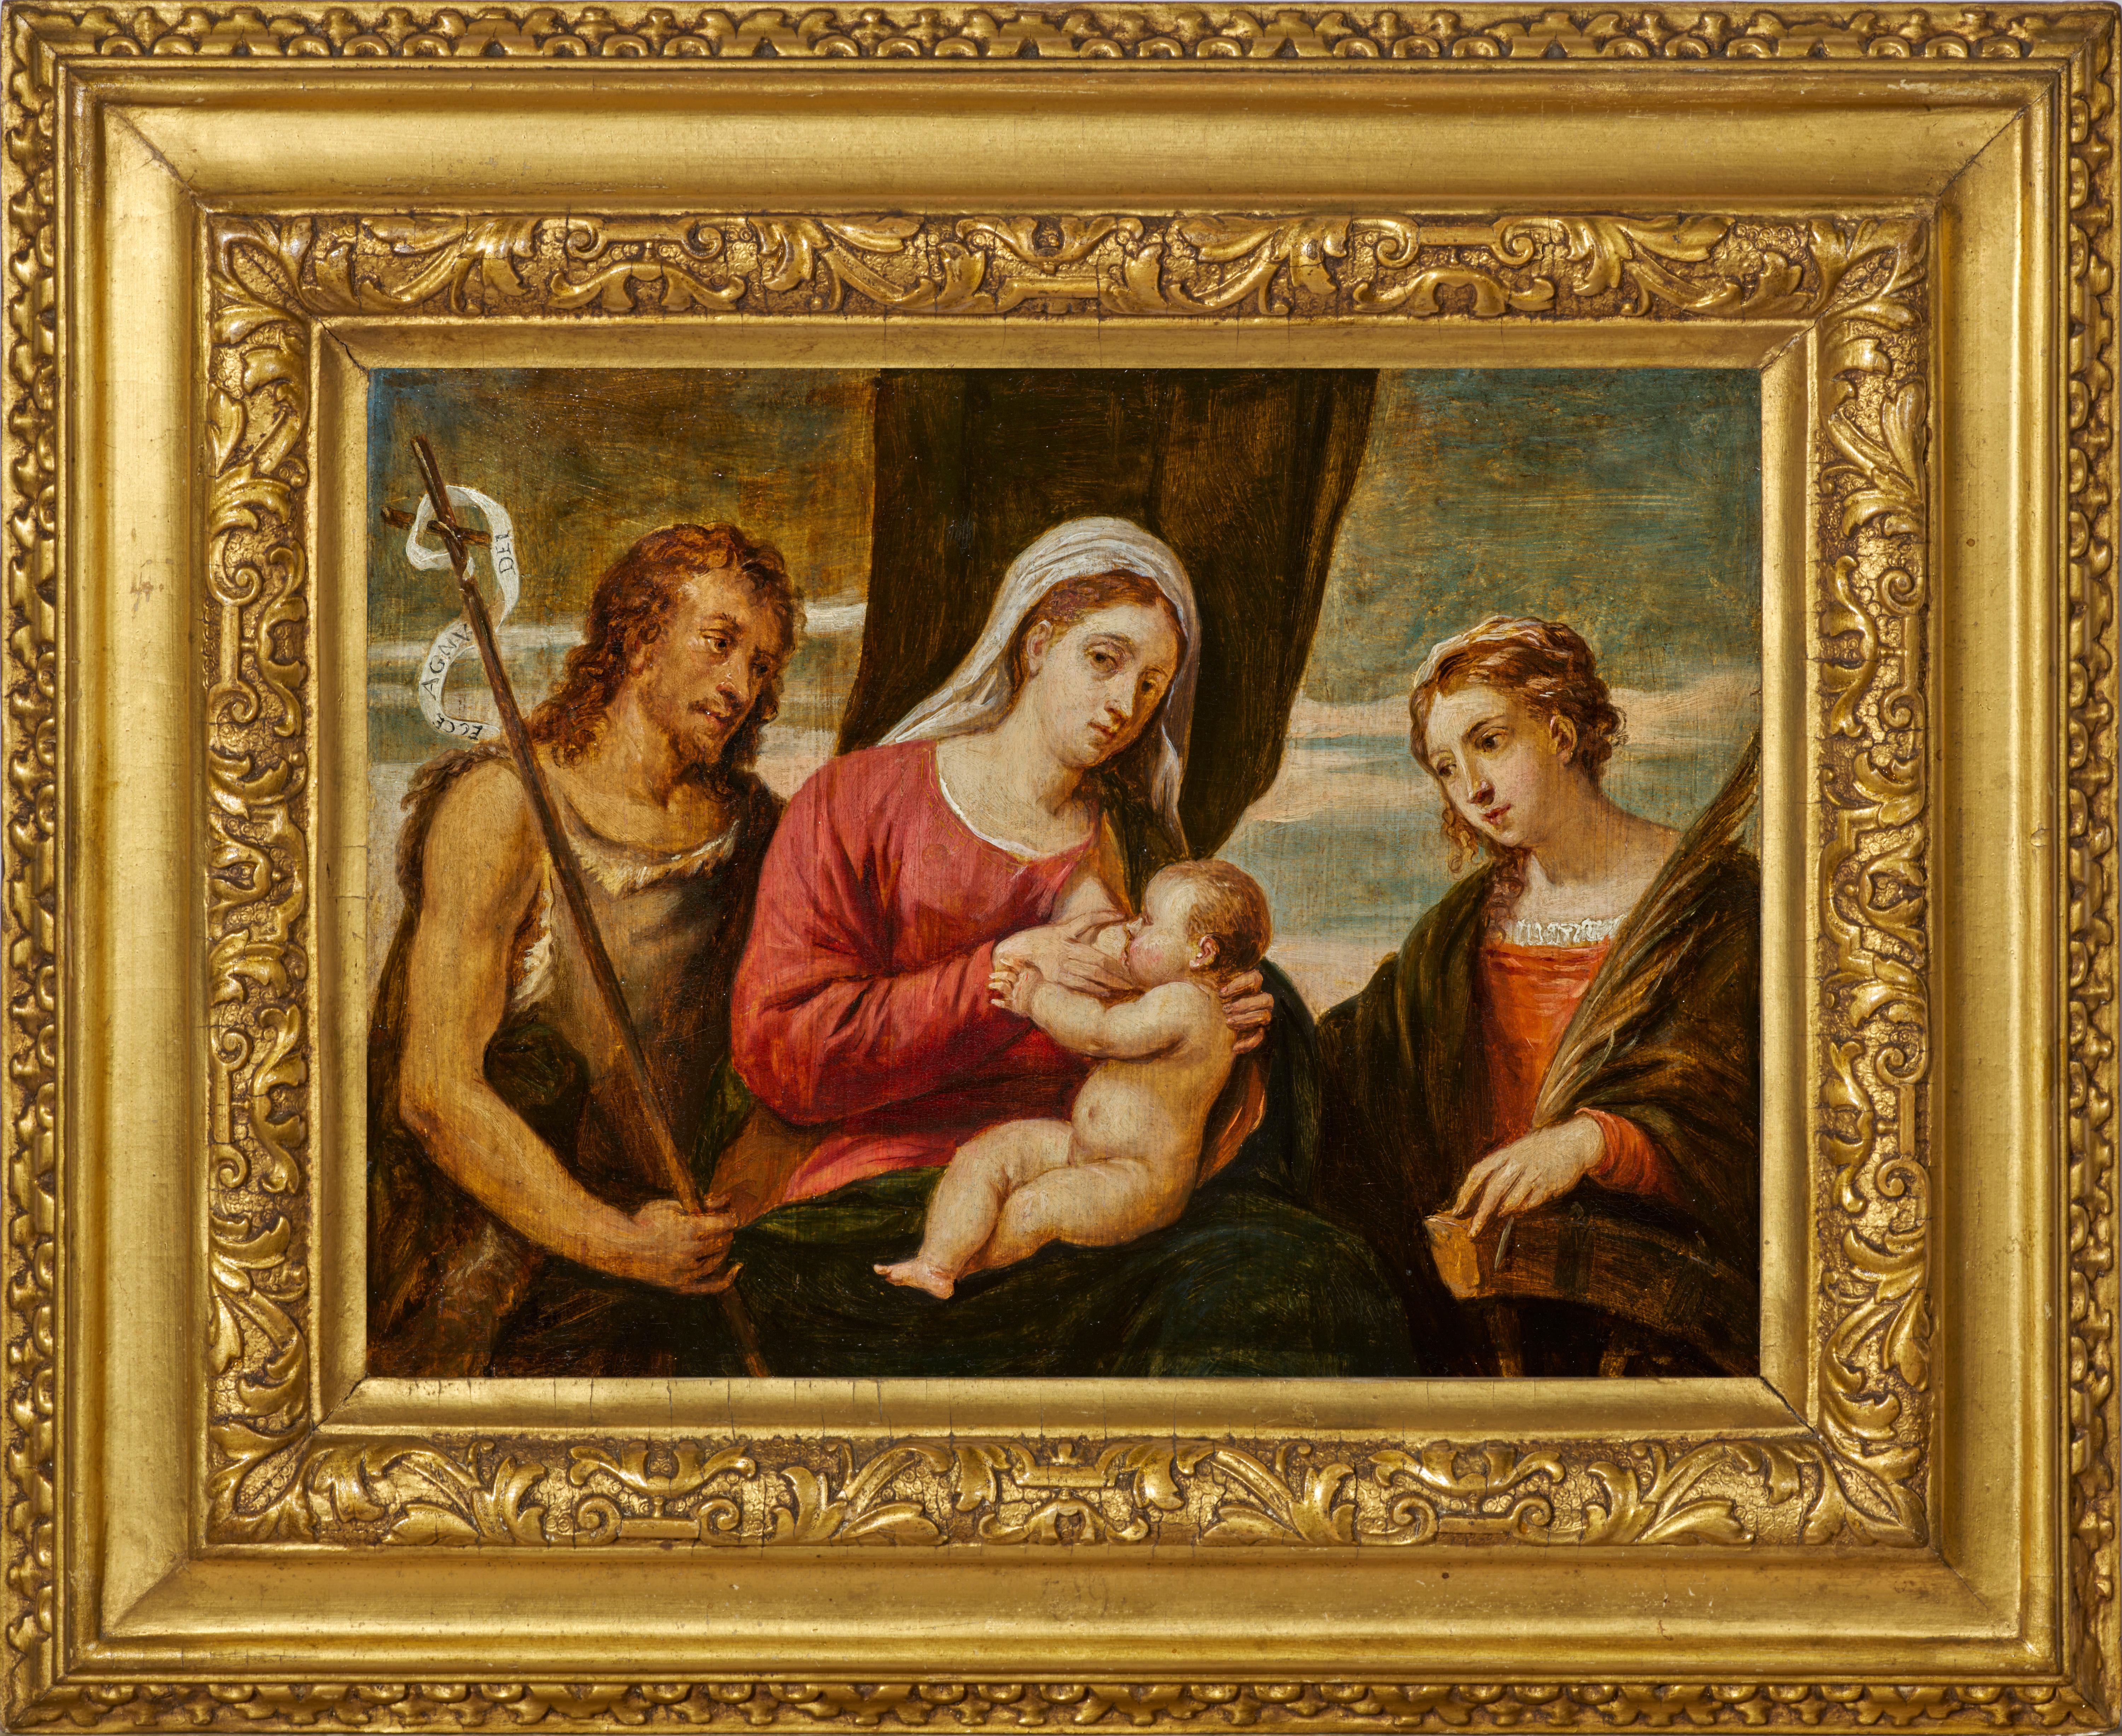 David Teniers the Younger - Virgin and Child, a paiting by David Teniers  the Younger after Palma Vecchio For Sale at 1stDibs